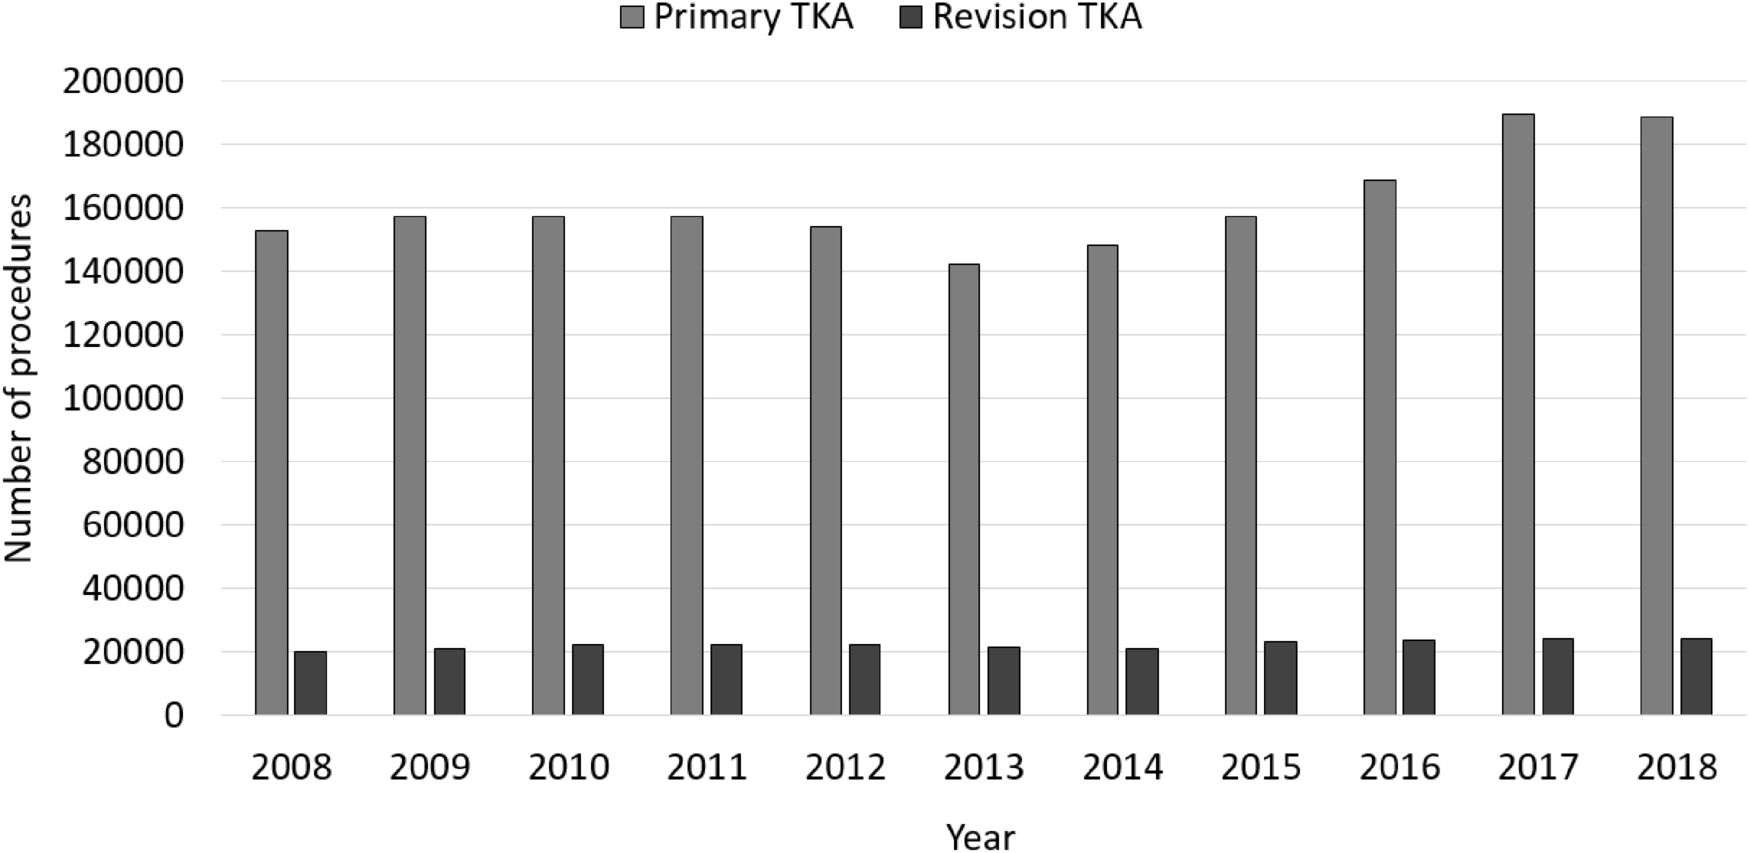 Recent trends in revision knee arthroplasty in Germany | Scientific Reports